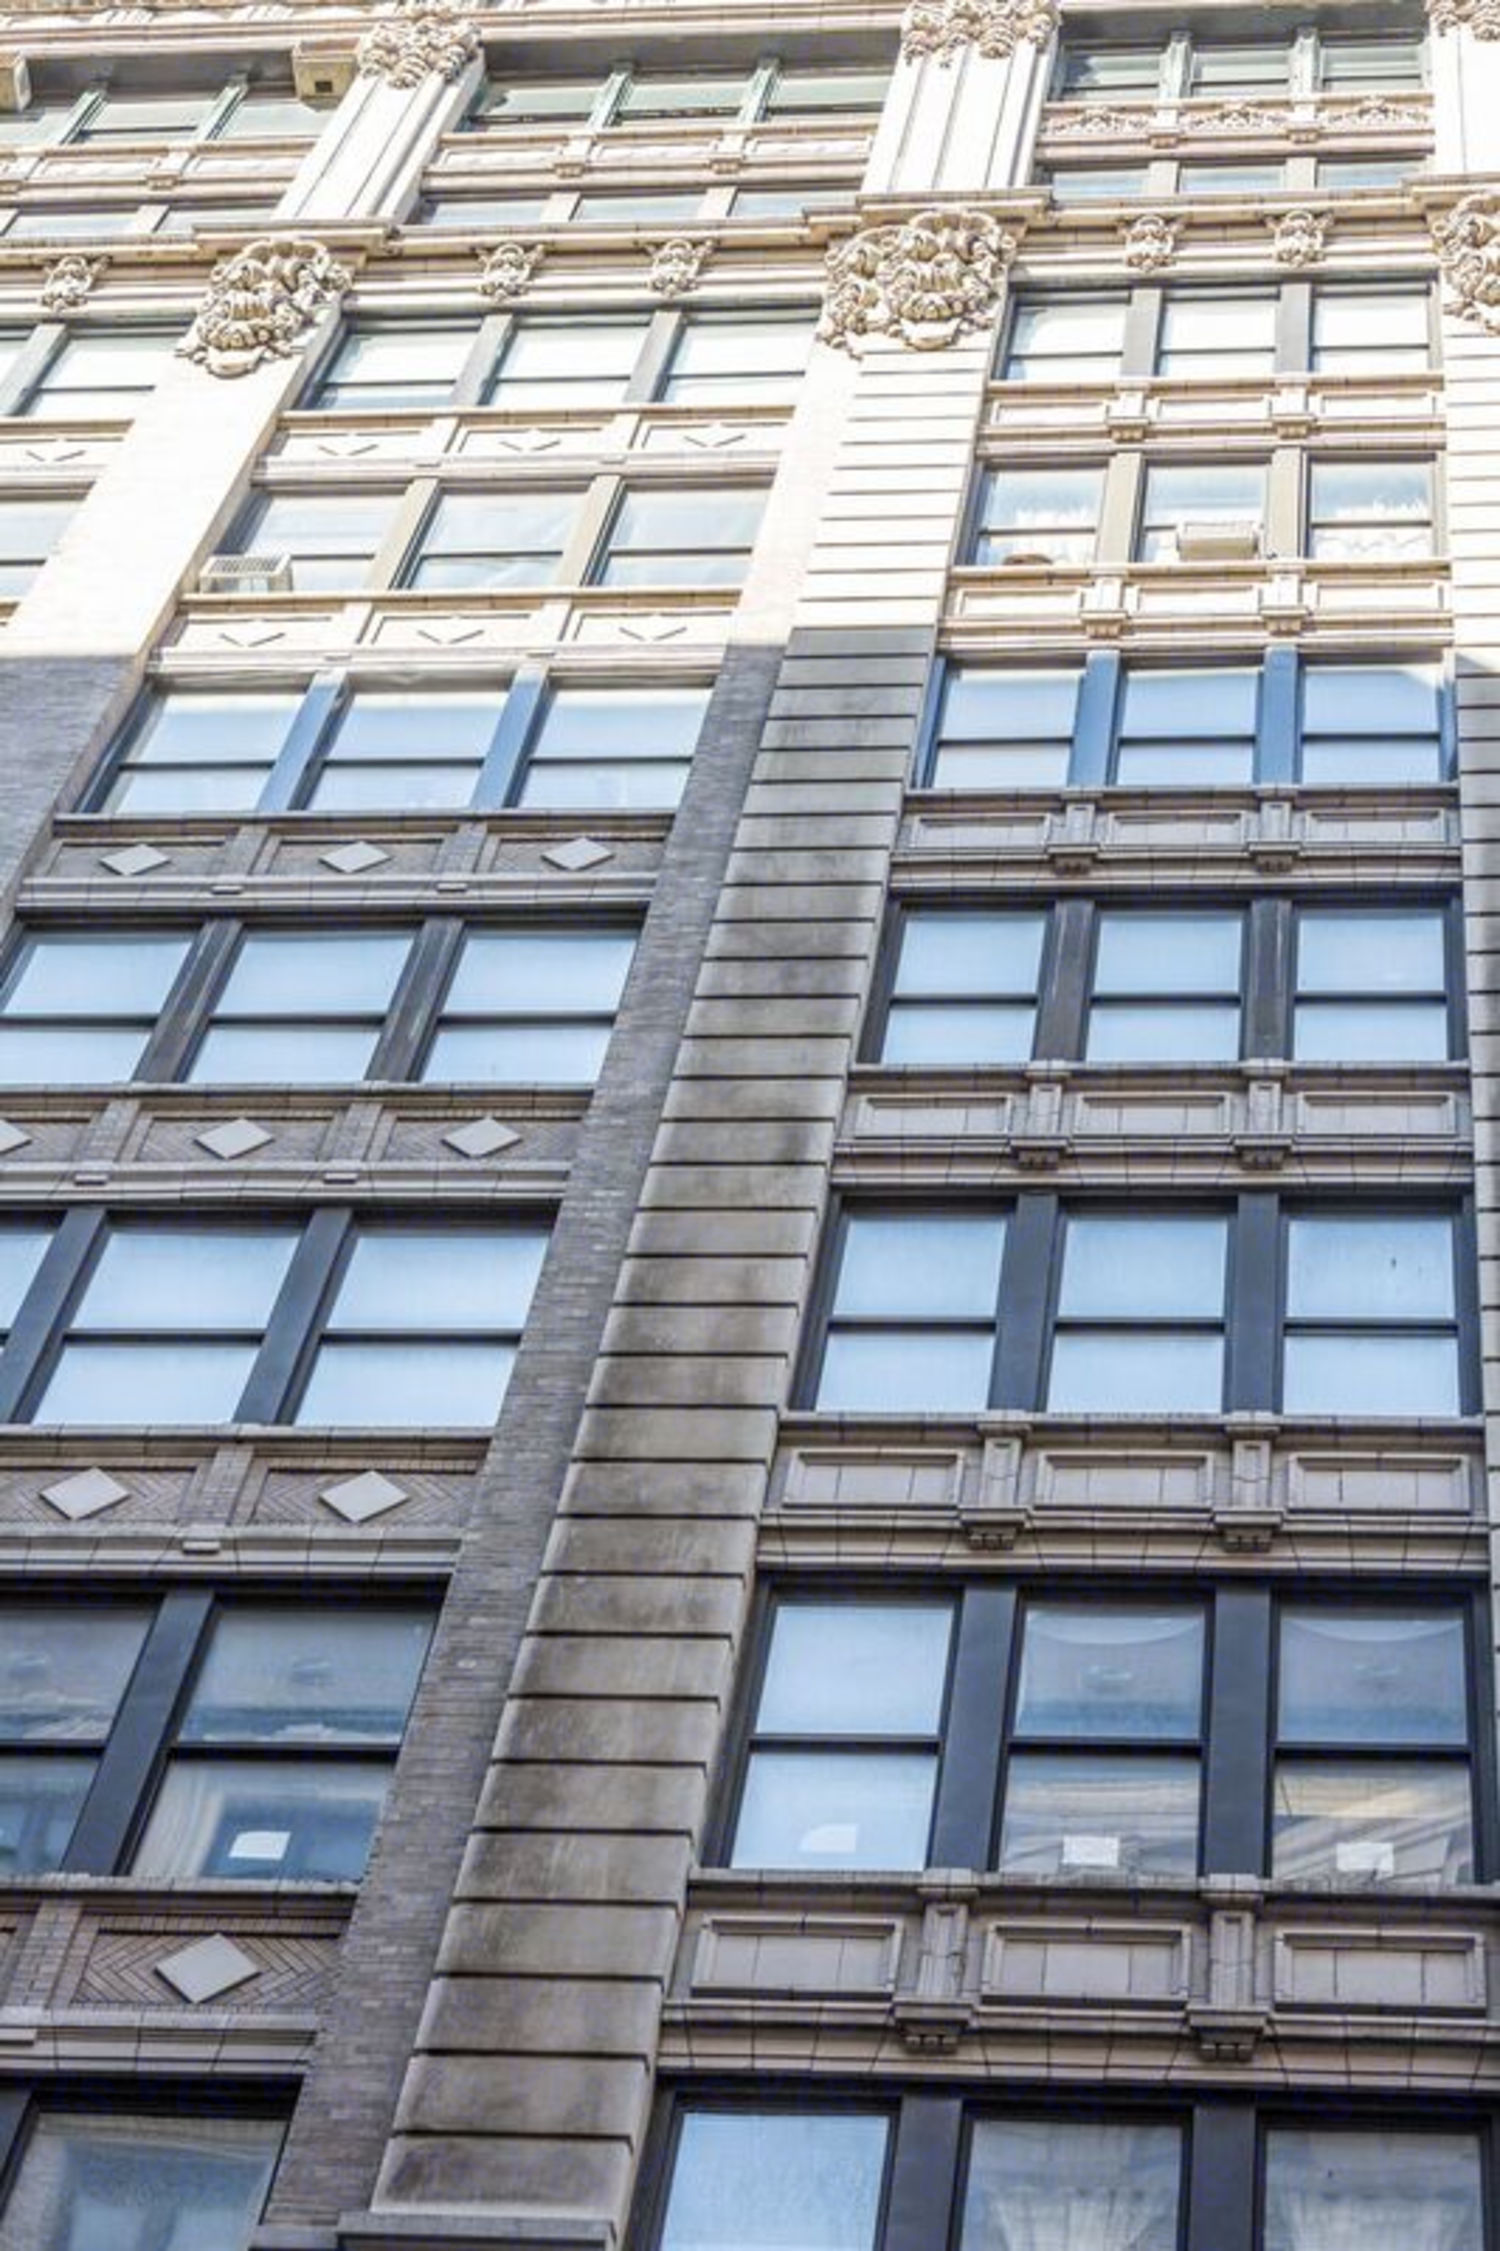 37 West 26th Street, New York, NY Office Space for Rent | VTS